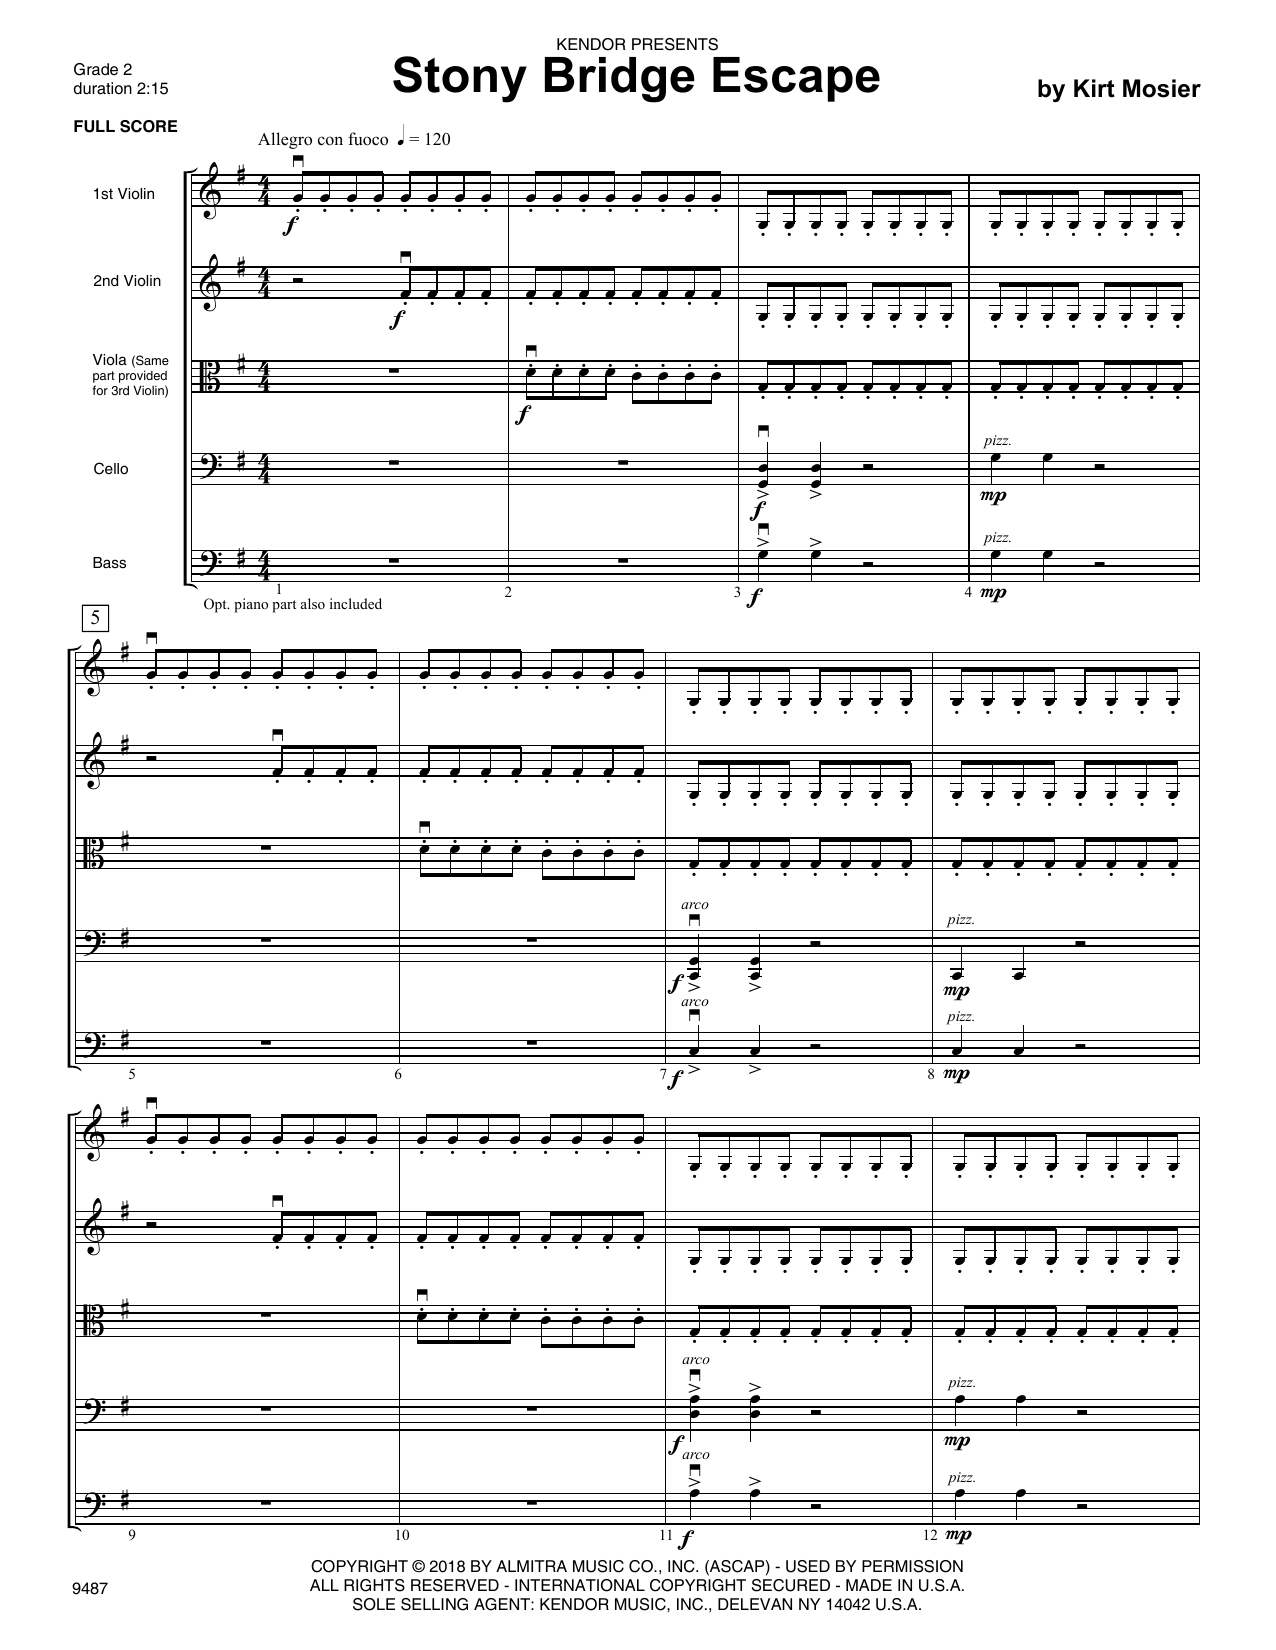 Kirt Mosier Stony Bridge Escape - Full Score sheet music preview music notes and score for Orchestra including 7 page(s)